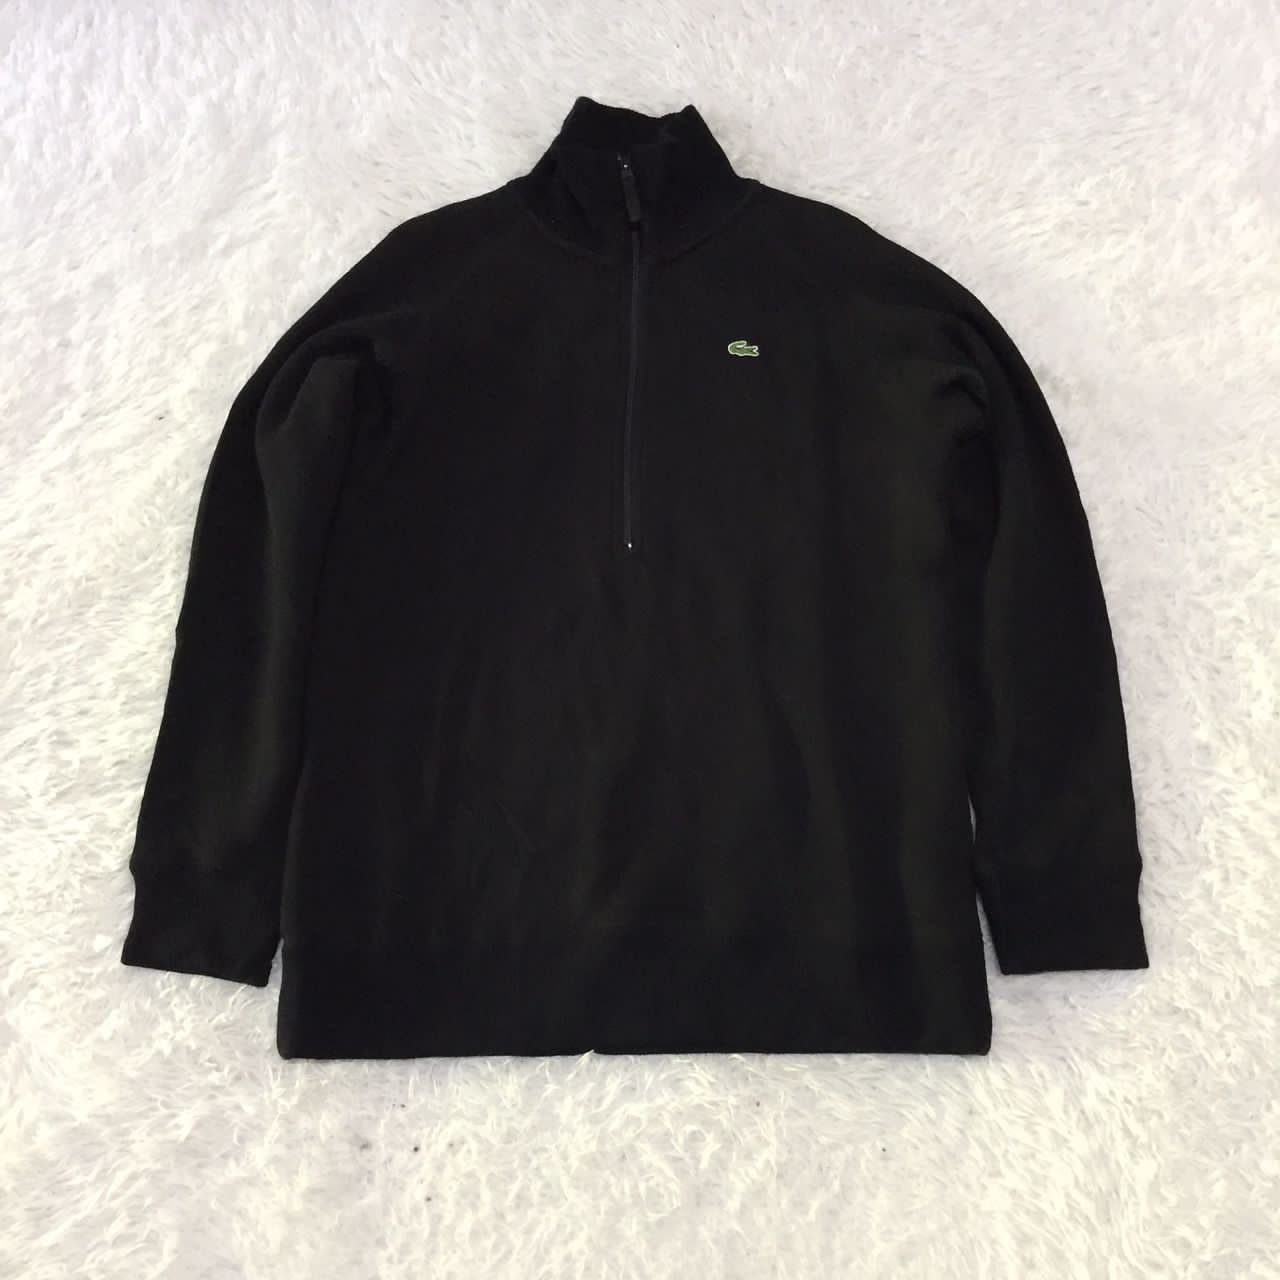 Lacoste sweater jacket made in Japan - 9